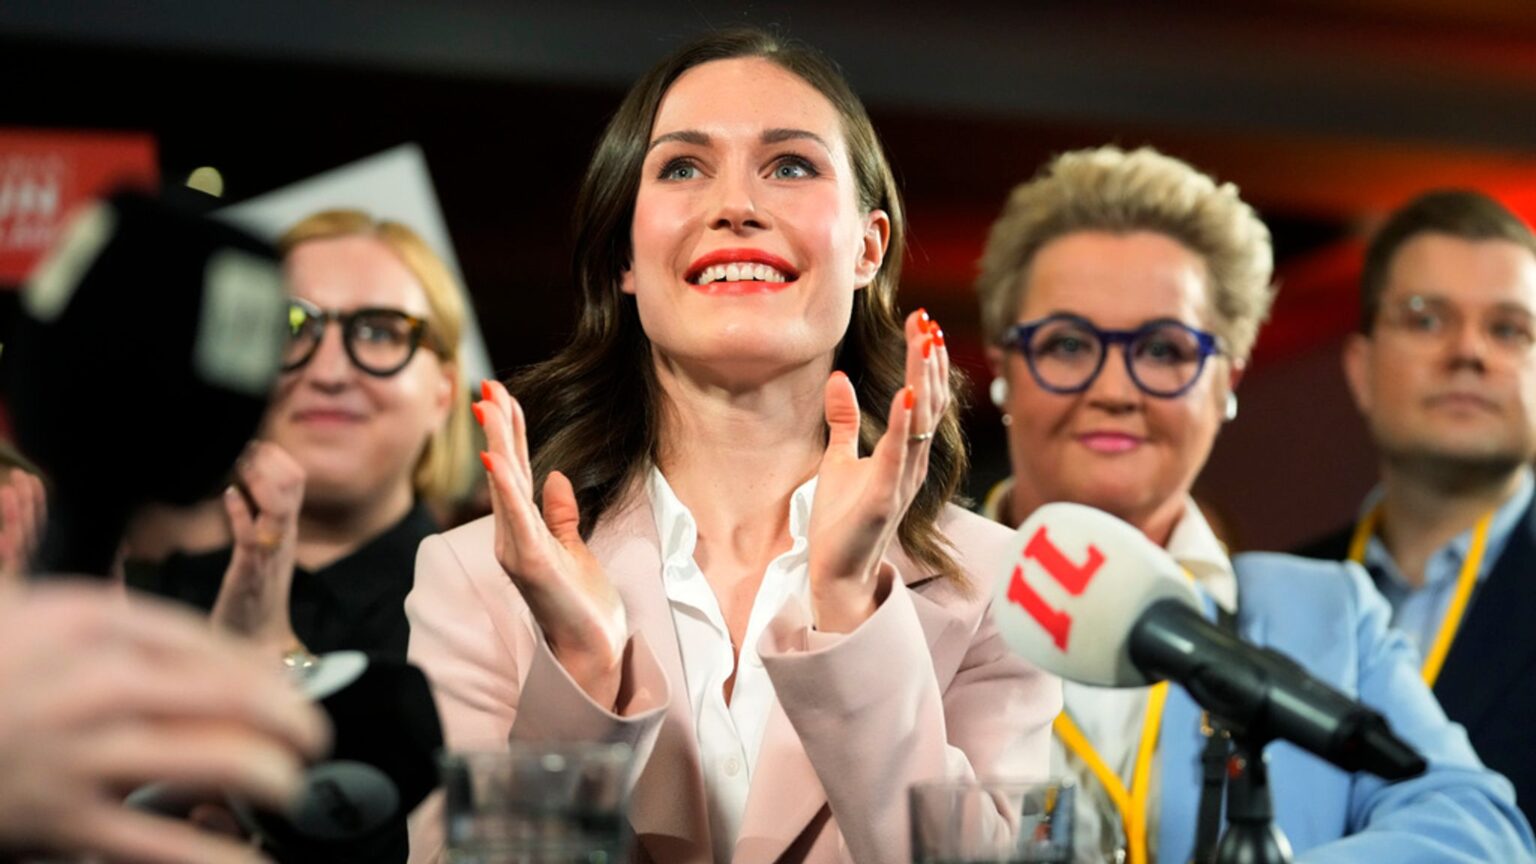 Sanna Marin defeated by Finland's conservatives in tight race